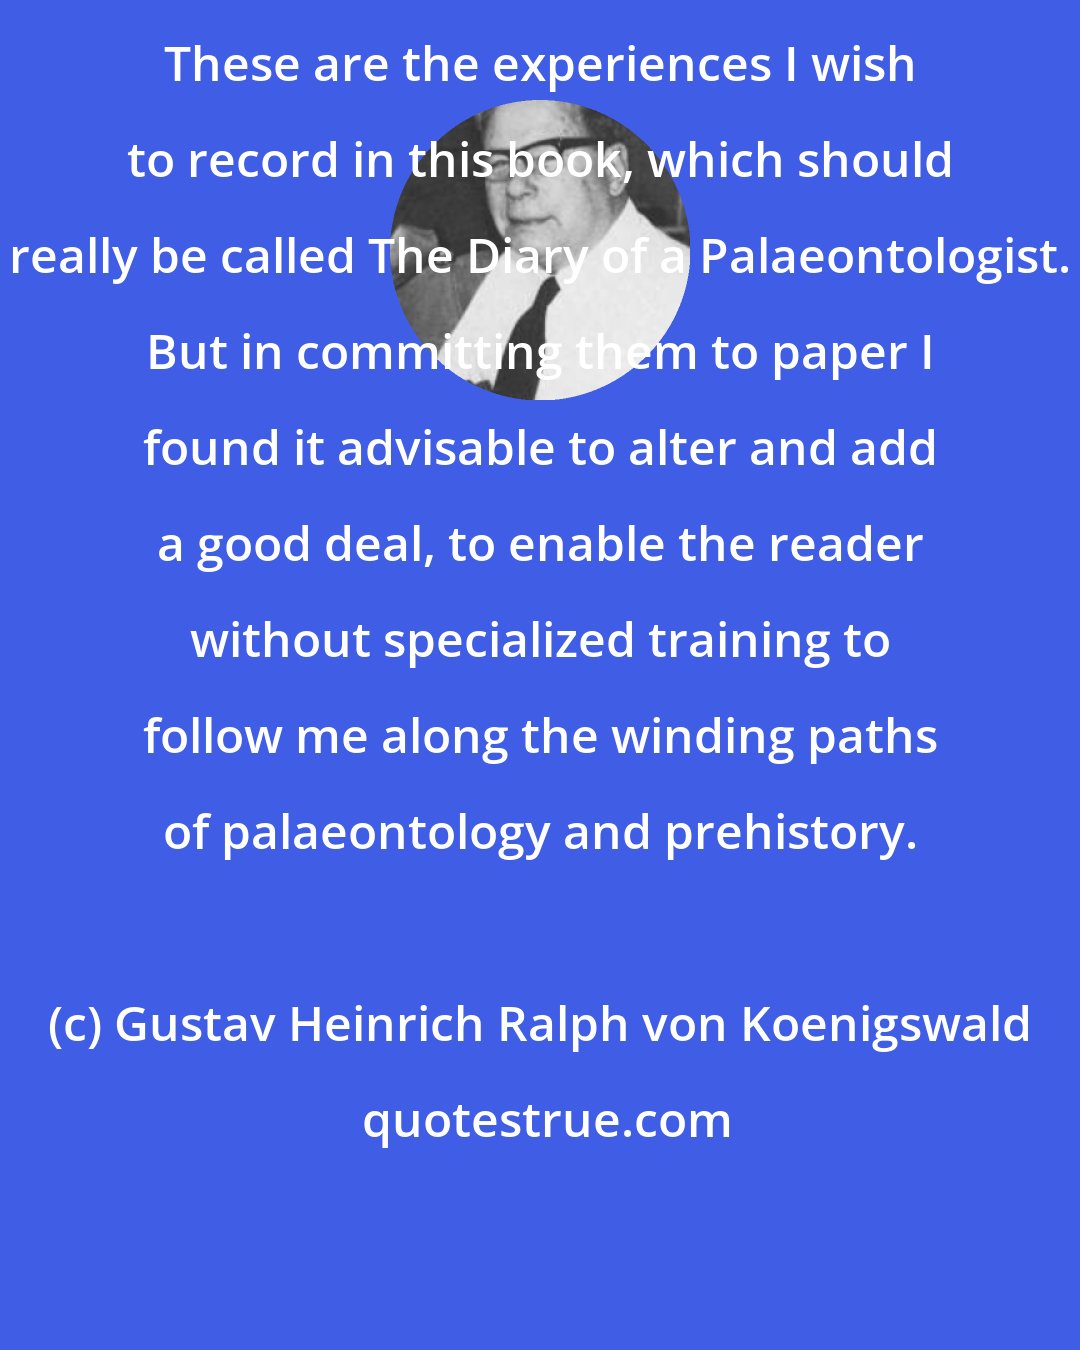 Gustav Heinrich Ralph von Koenigswald: These are the experiences I wish to record in this book, which should really be called The Diary of a Palaeontologist. But in committing them to paper I found it advisable to alter and add a good deal, to enable the reader without specialized training to follow me along the winding paths of palaeontology and prehistory.